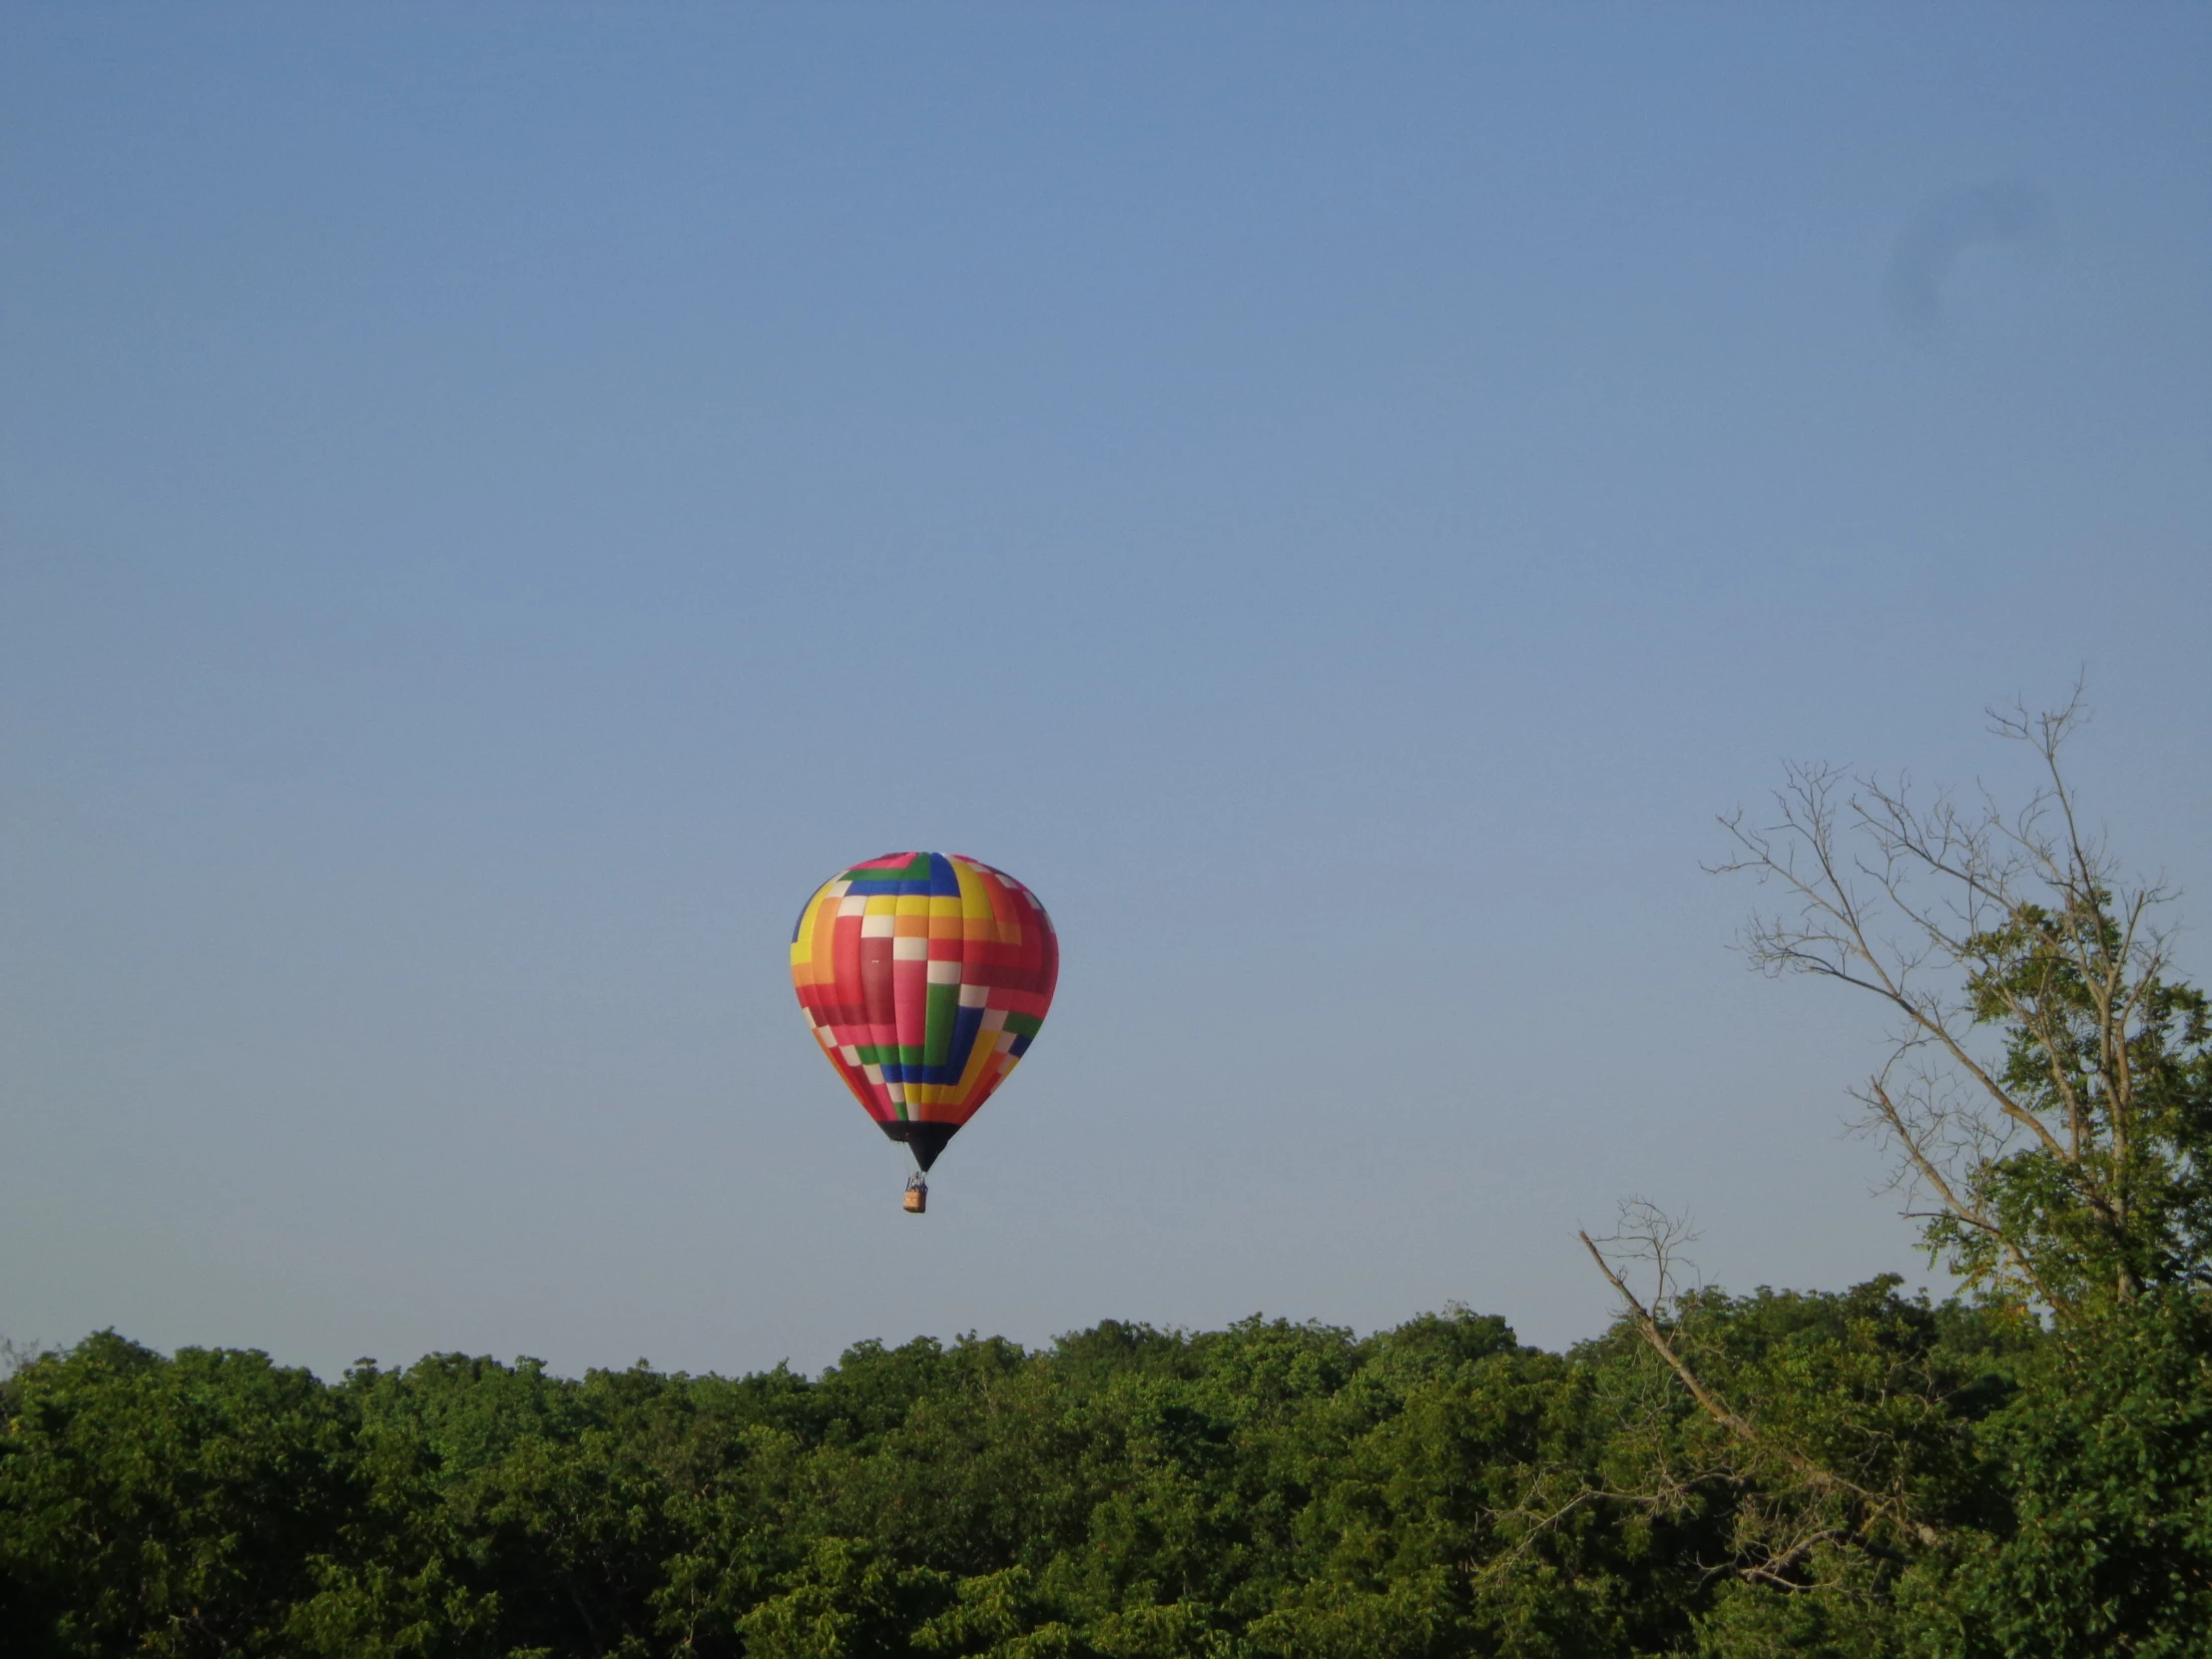 a large balloon is flying in the sky above some trees